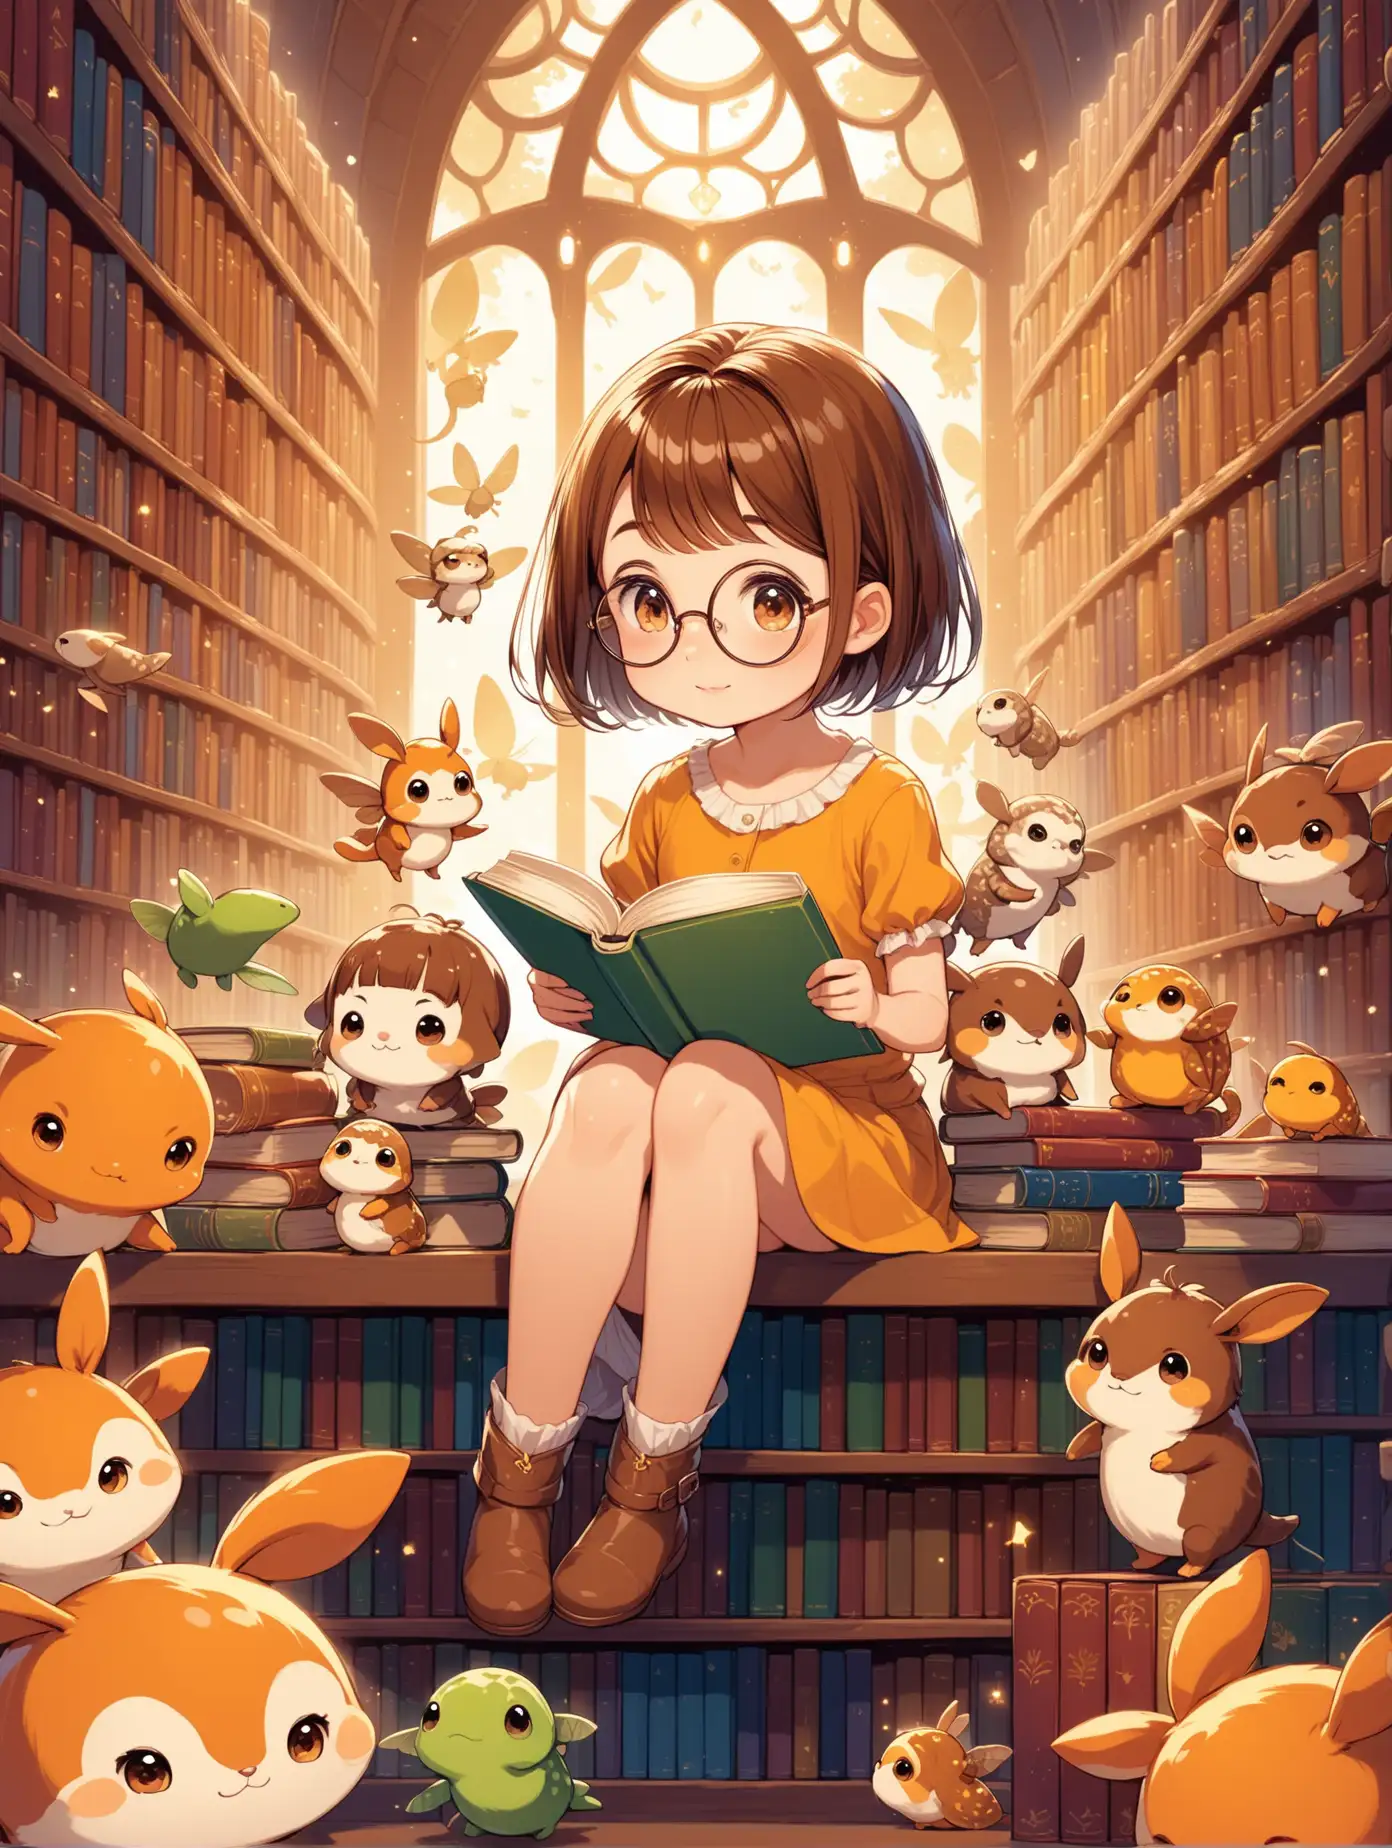 Adorable Cartoon Girl Reading in Fantasy Library Surrounded by Cute Creatures